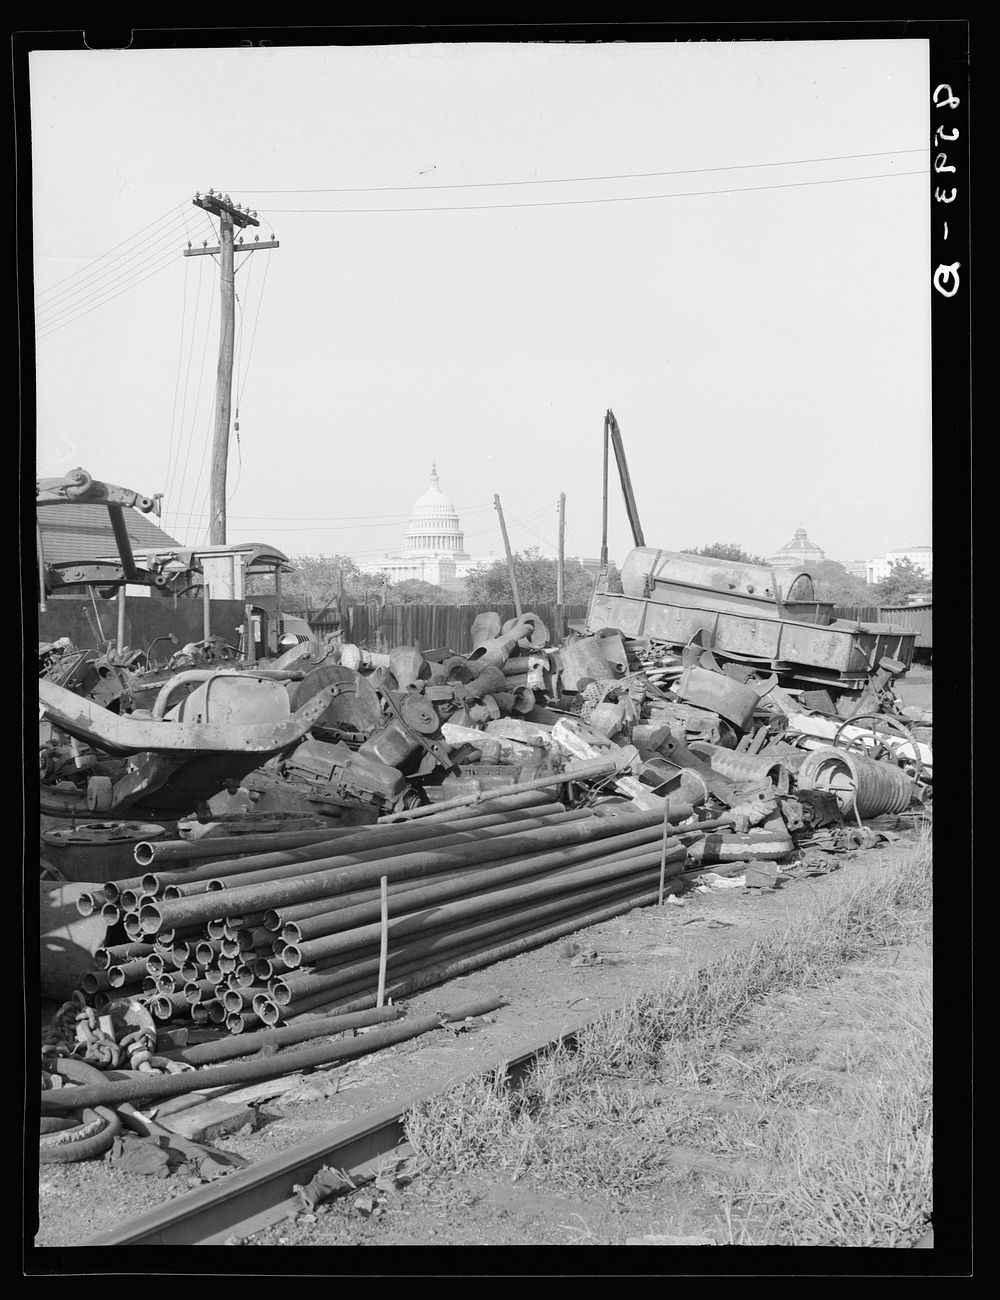 Junkyard. Washington, D.C.. Sourced from the Library of Congress.